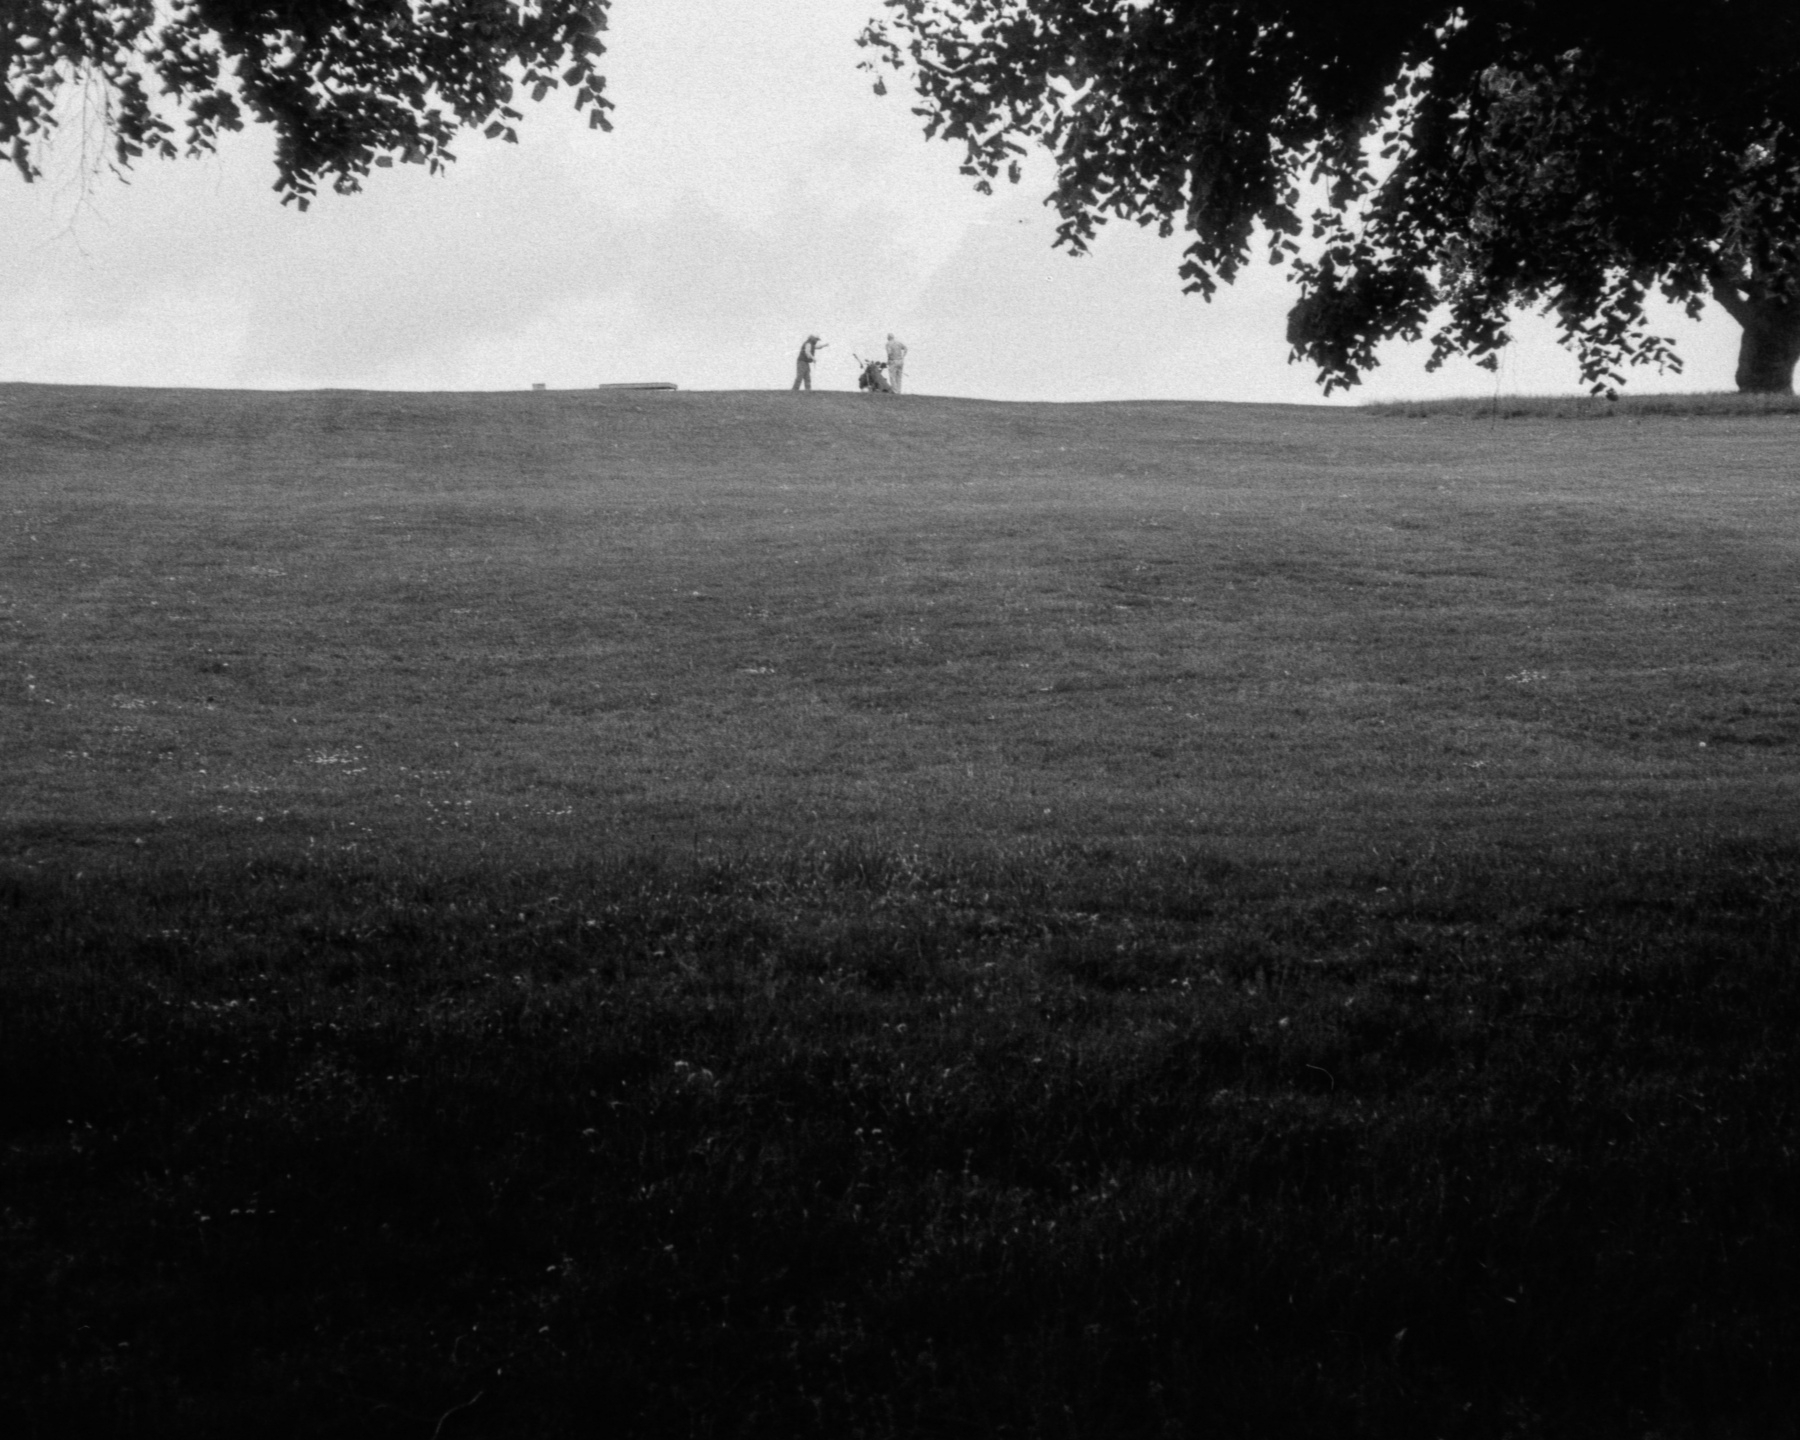 Two men playing golf in the distance in Ashton Court, Bristol